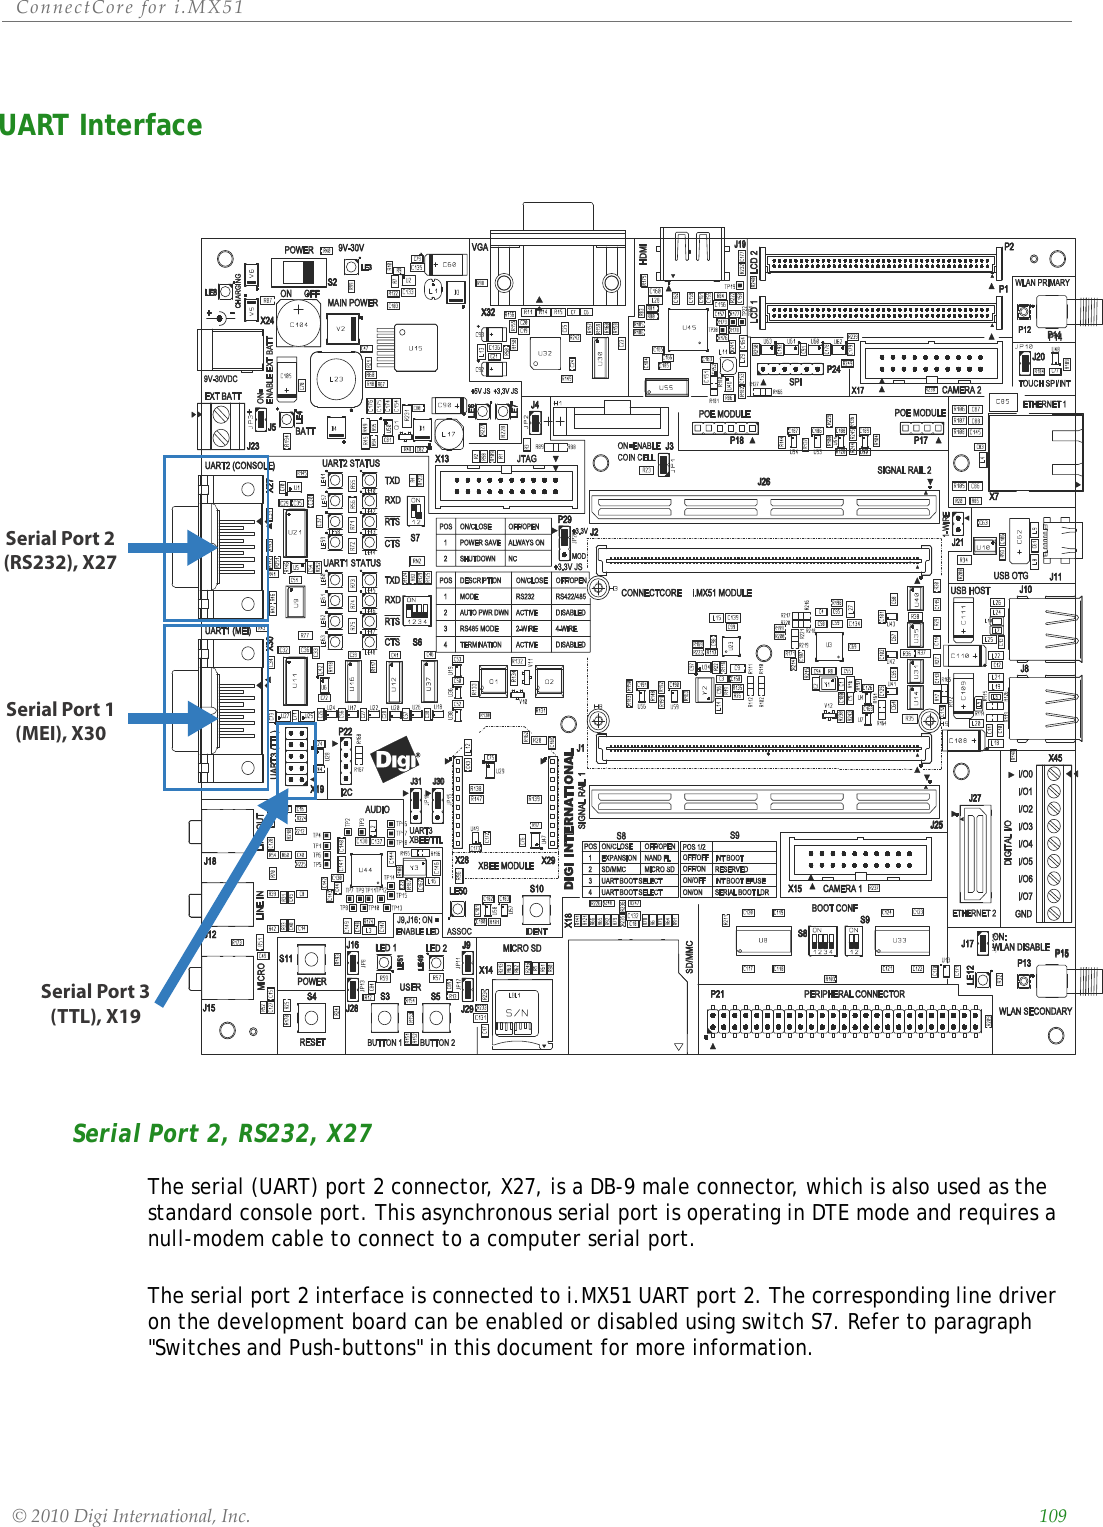 ConnectCorefori.MX51©2010DigiInternational,Inc. 109UART InterfaceSerial Port 2, RS232, X27The serial (UART) port 2 connector, X27, is a DB-9 male connector, which is also used as the standard console port. This asynchronous serial port is operating in DTE mode and requires a null-modem cable to connect to a computer serial port.The serial port 2 interface is connected to i.MX51 UART port 2. The corresponding line driver on the development board can be enabled or disabled using switch S7. Refer to paragraph &quot;Switches and Push-buttons&quot; in this document for more information.Serial Port 2(RS232), X27Serial Port 1(MEI), X30Serial Port 3(TTL), X19